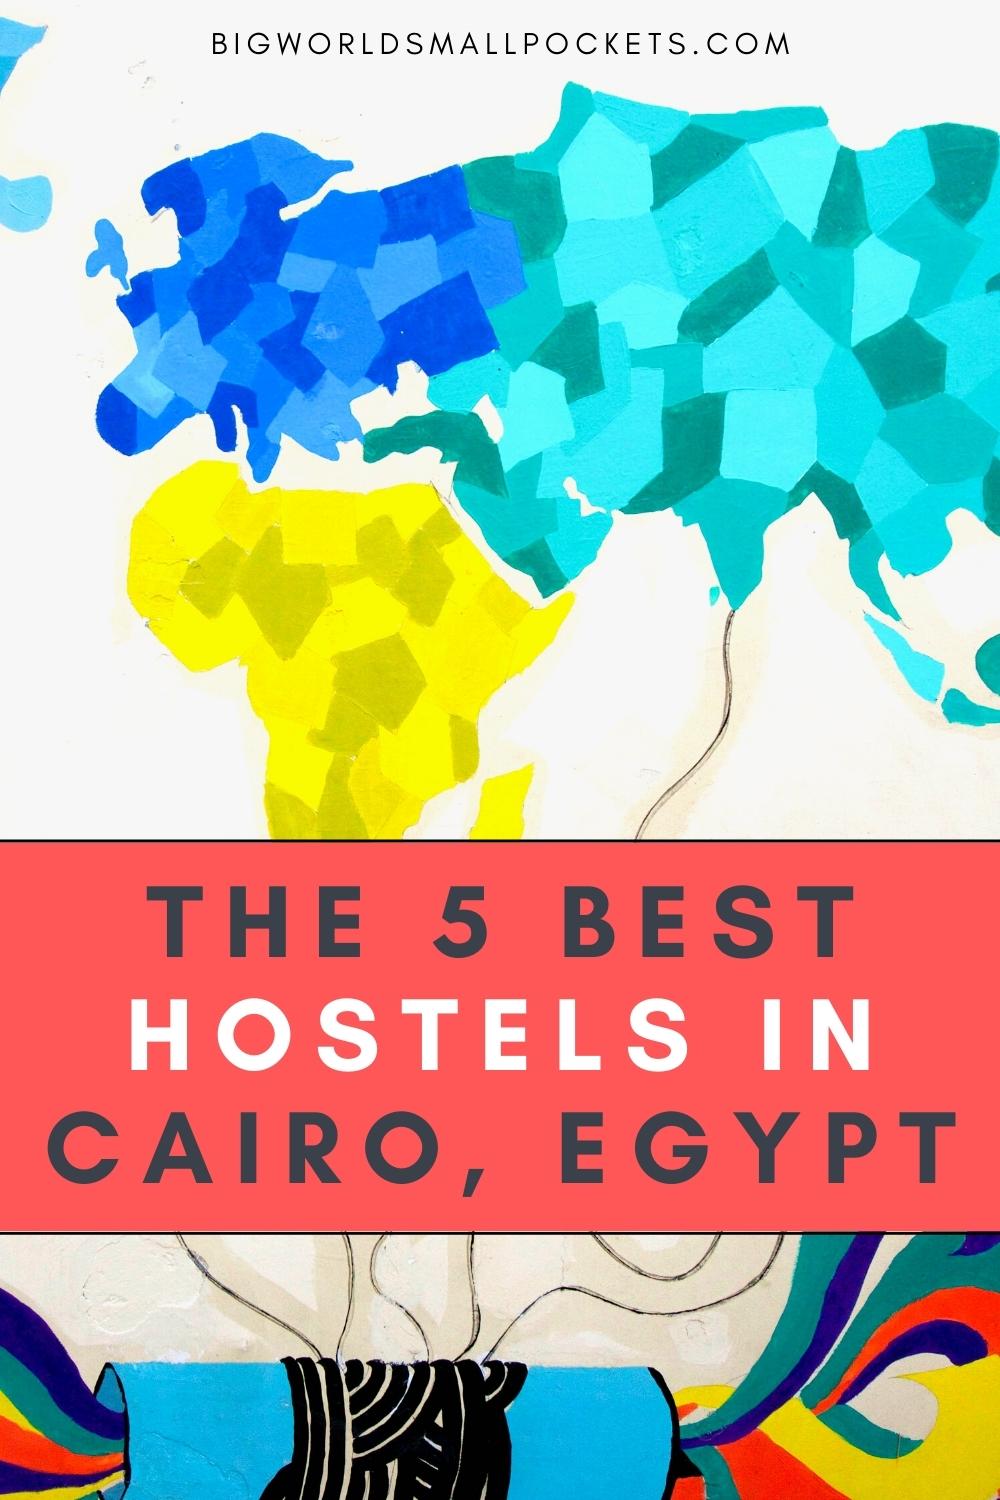 Top 5 Hostels in Cairo, Egypt